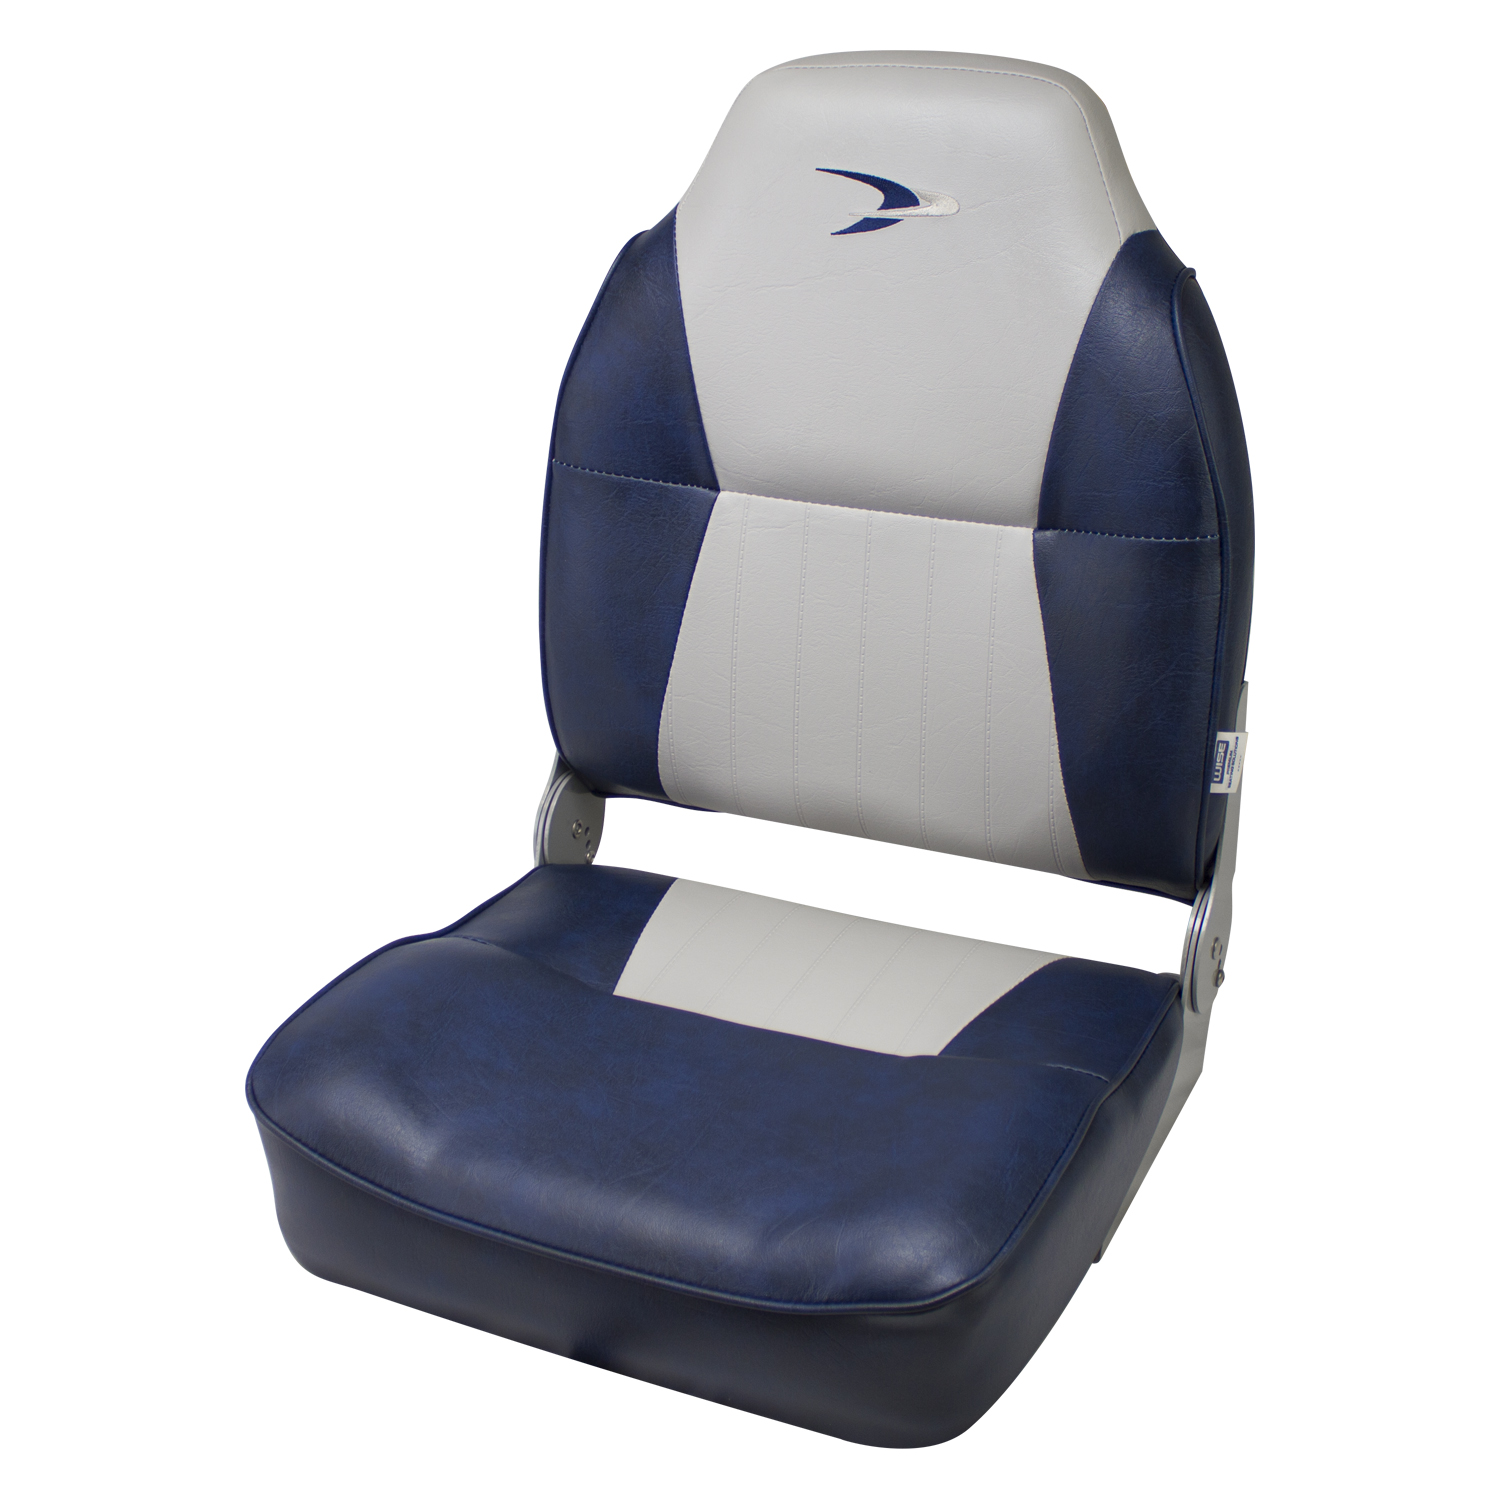 Wise 8WD640PLS-660 Lund Style High-Back Boat Seat, Grey / Navy - image 1 of 4